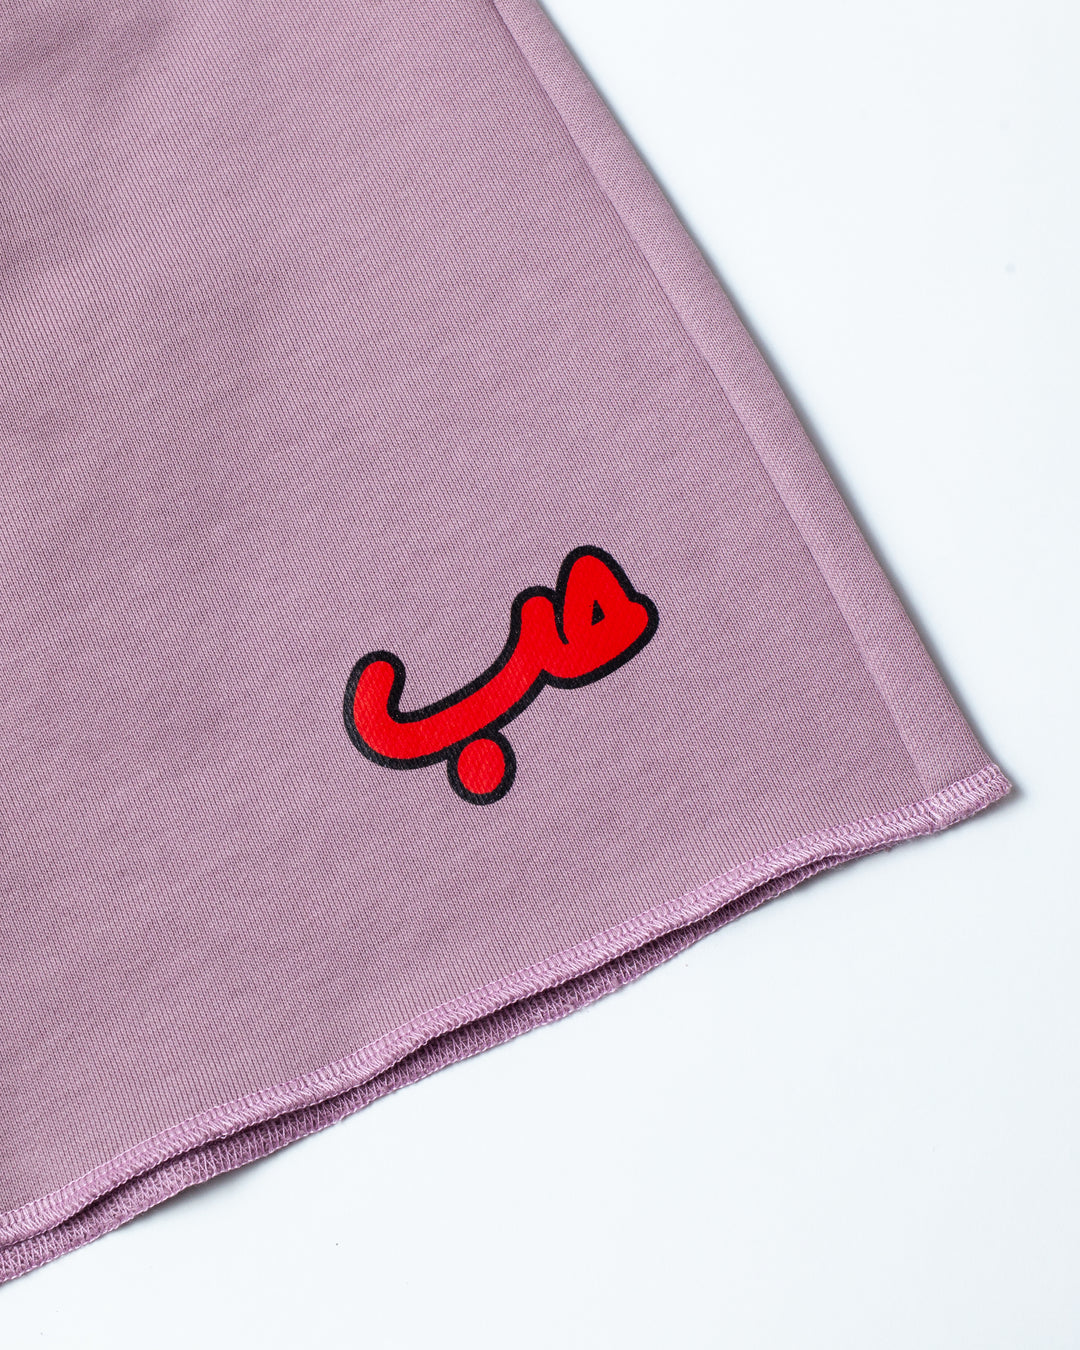 Close up on Hobb written in Arabic حب and printed in red silkscreen on the side of a flared lavender short.